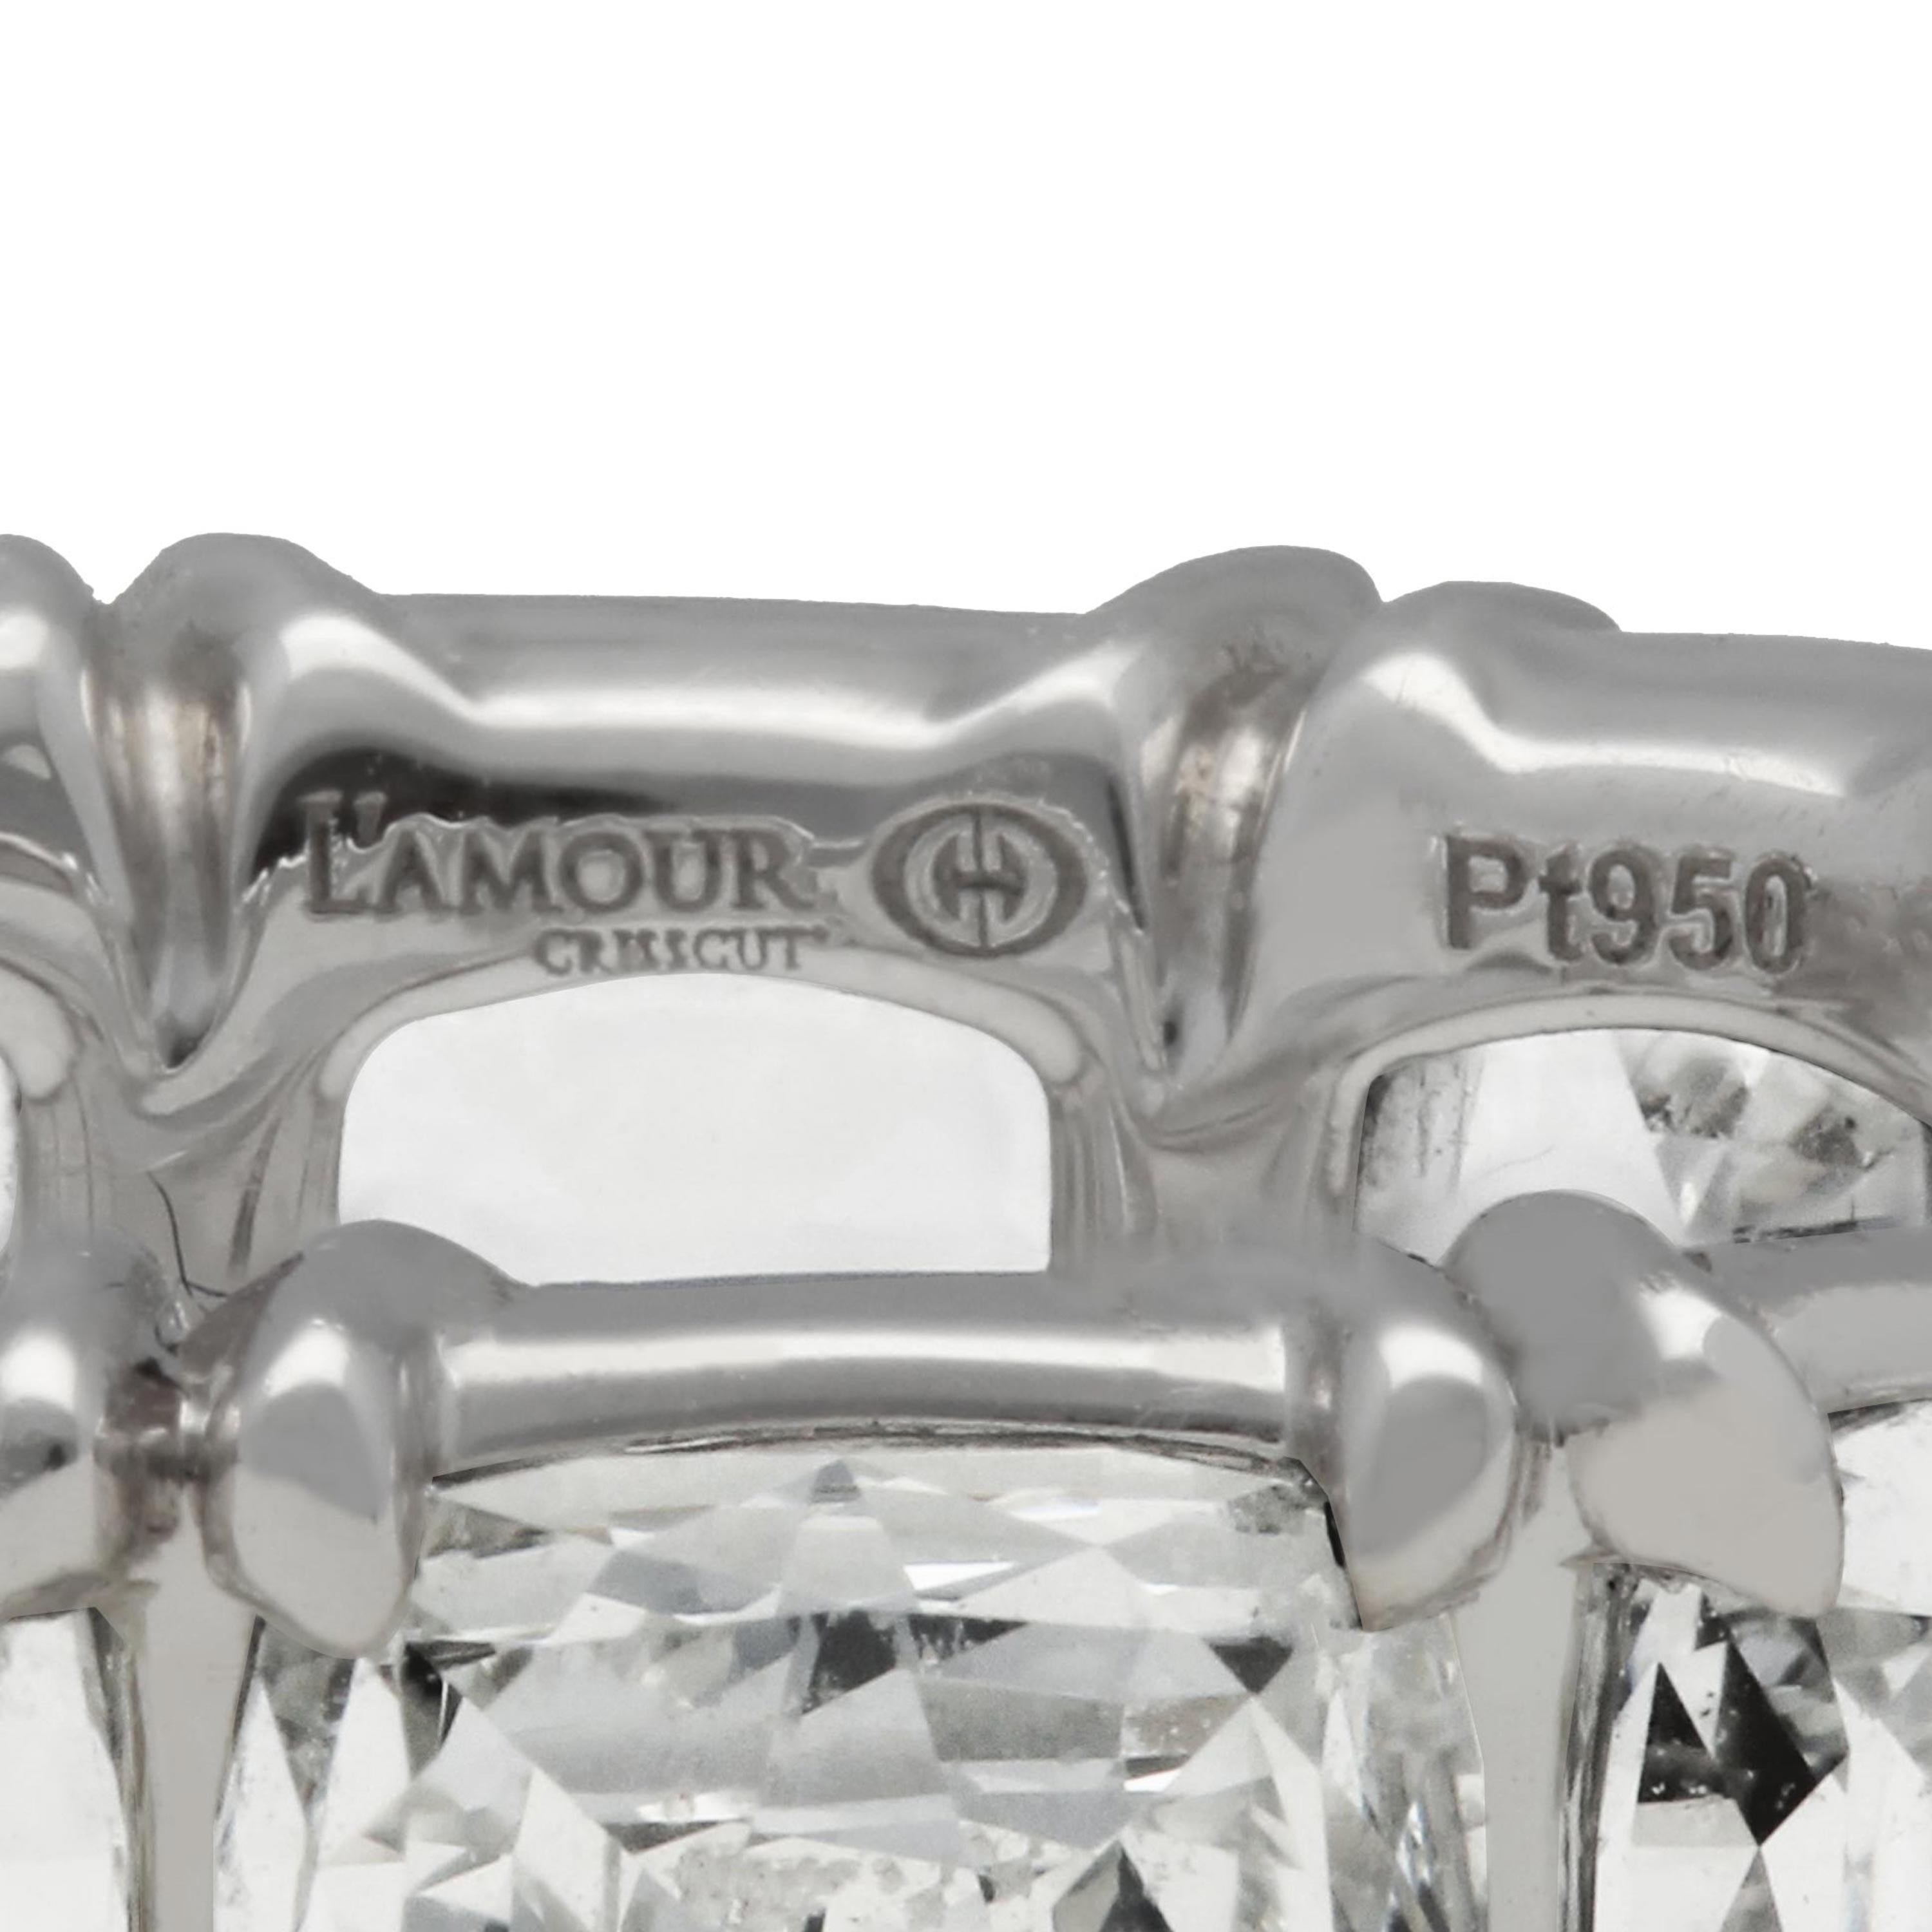 This gorgeous platinum eternity band from Christopher Designs of New York, features their famous craftsmanship and well as a total of thirteen L'amour emerald Crisscut diamonds totaling 5.76 carats, G color, VS clarity size 6.5.